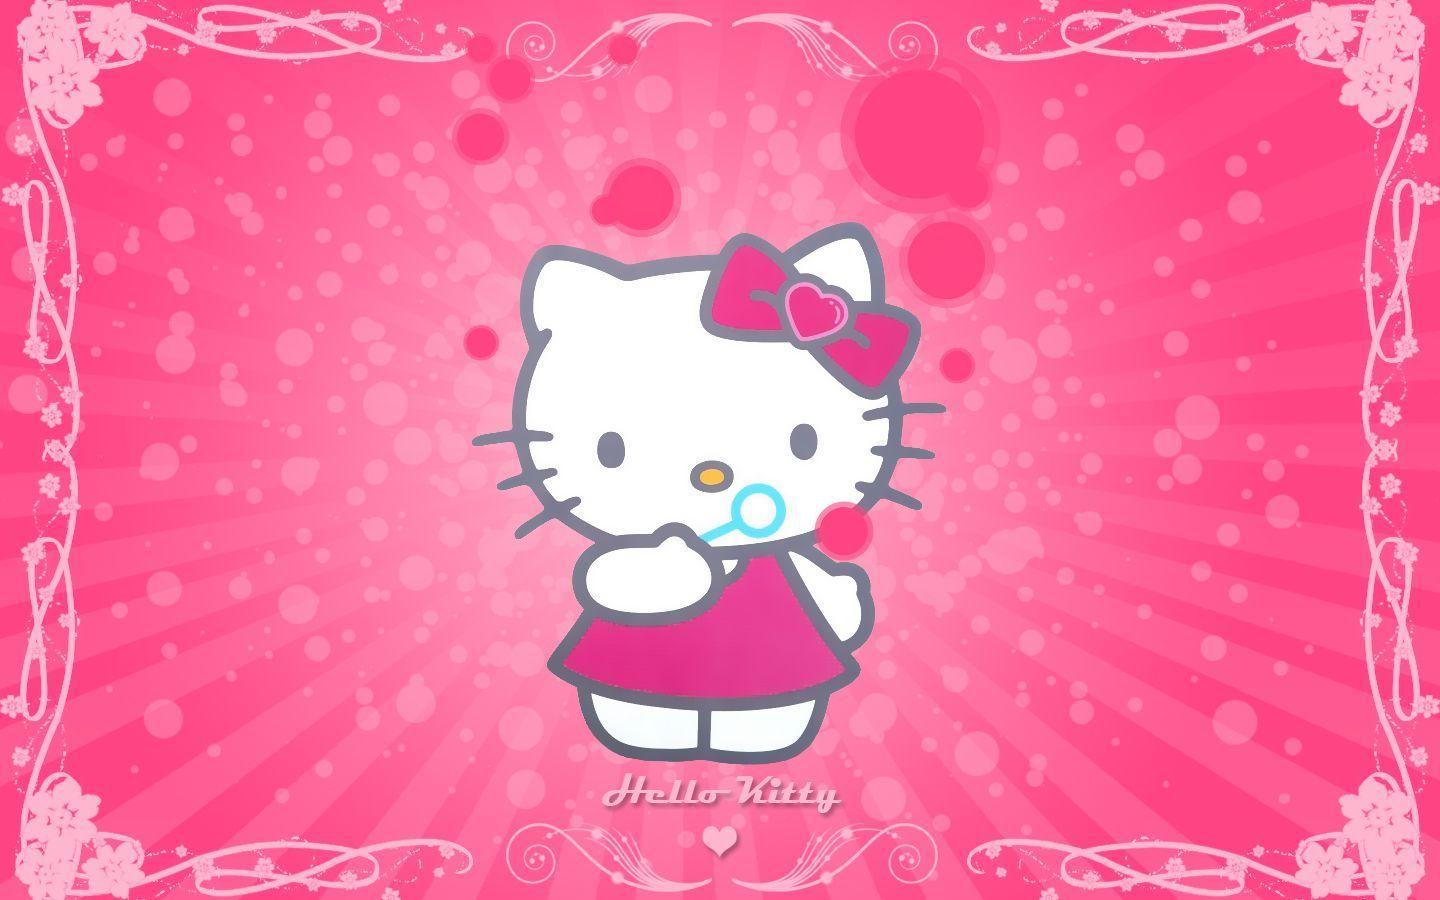 Hello Kitty Colorfull Wallpaper HD Background. Hdwidescreens